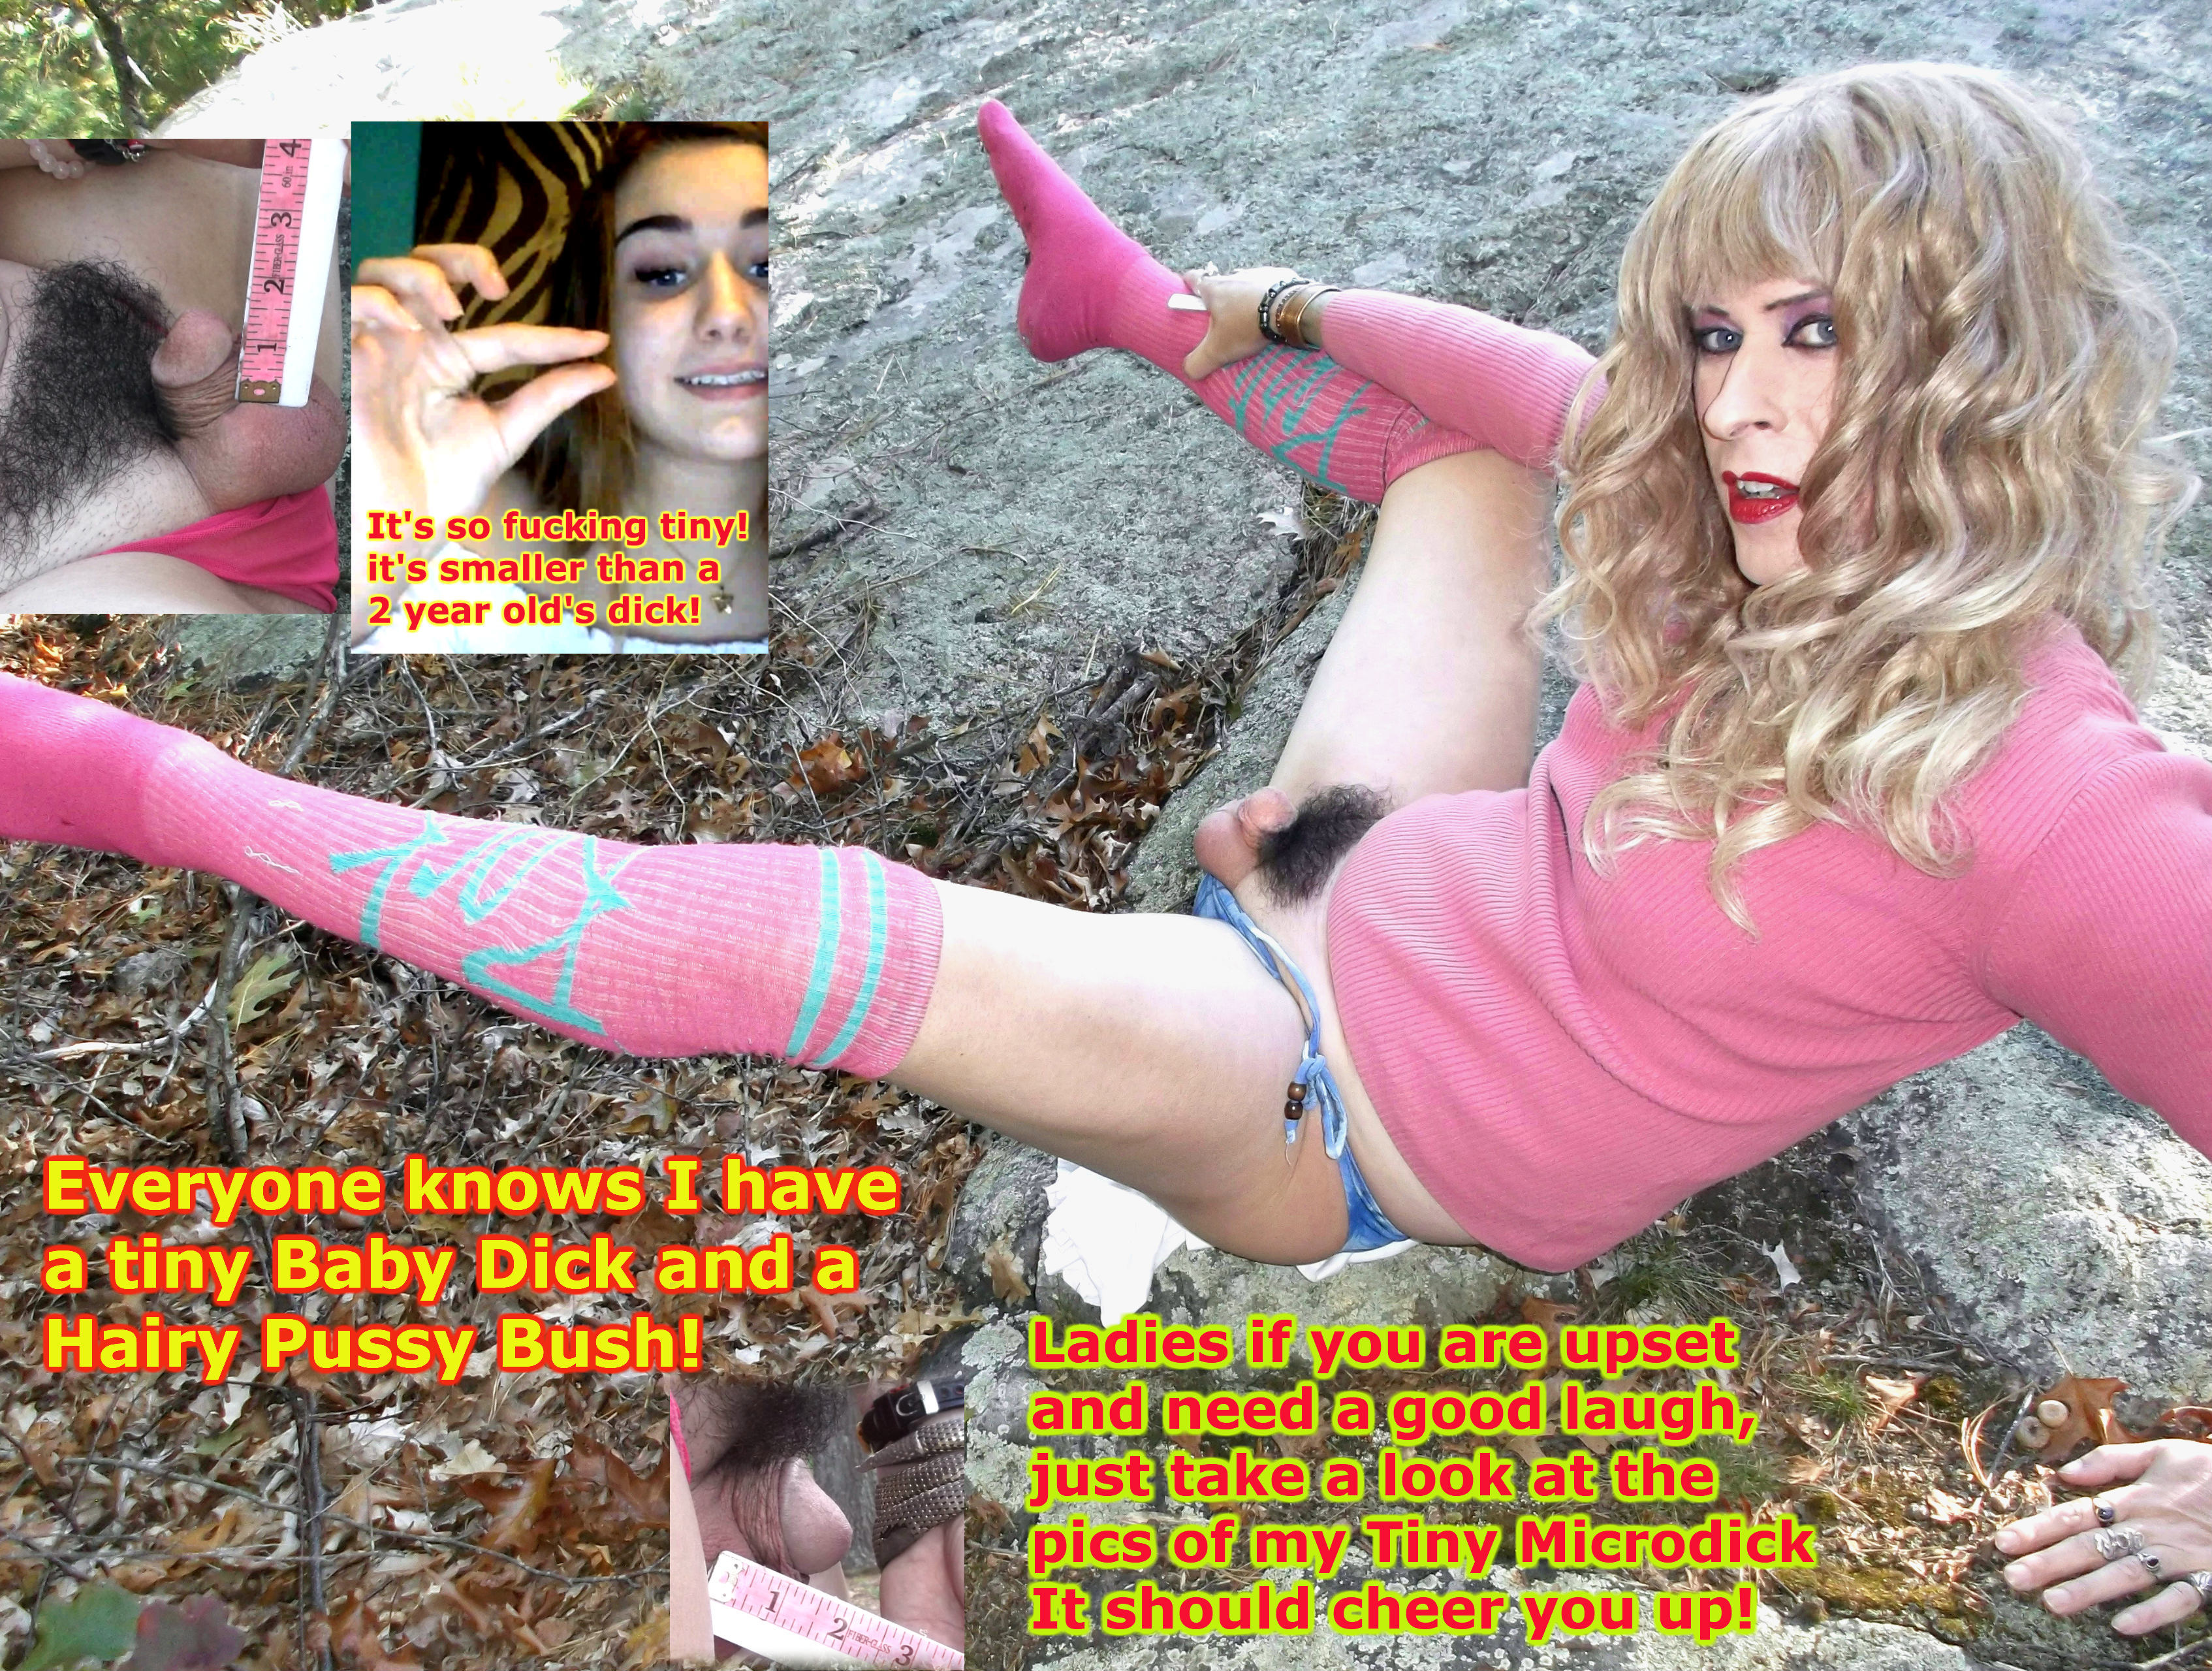 Hairy pussy crossdresser shows her itty bitty baby image